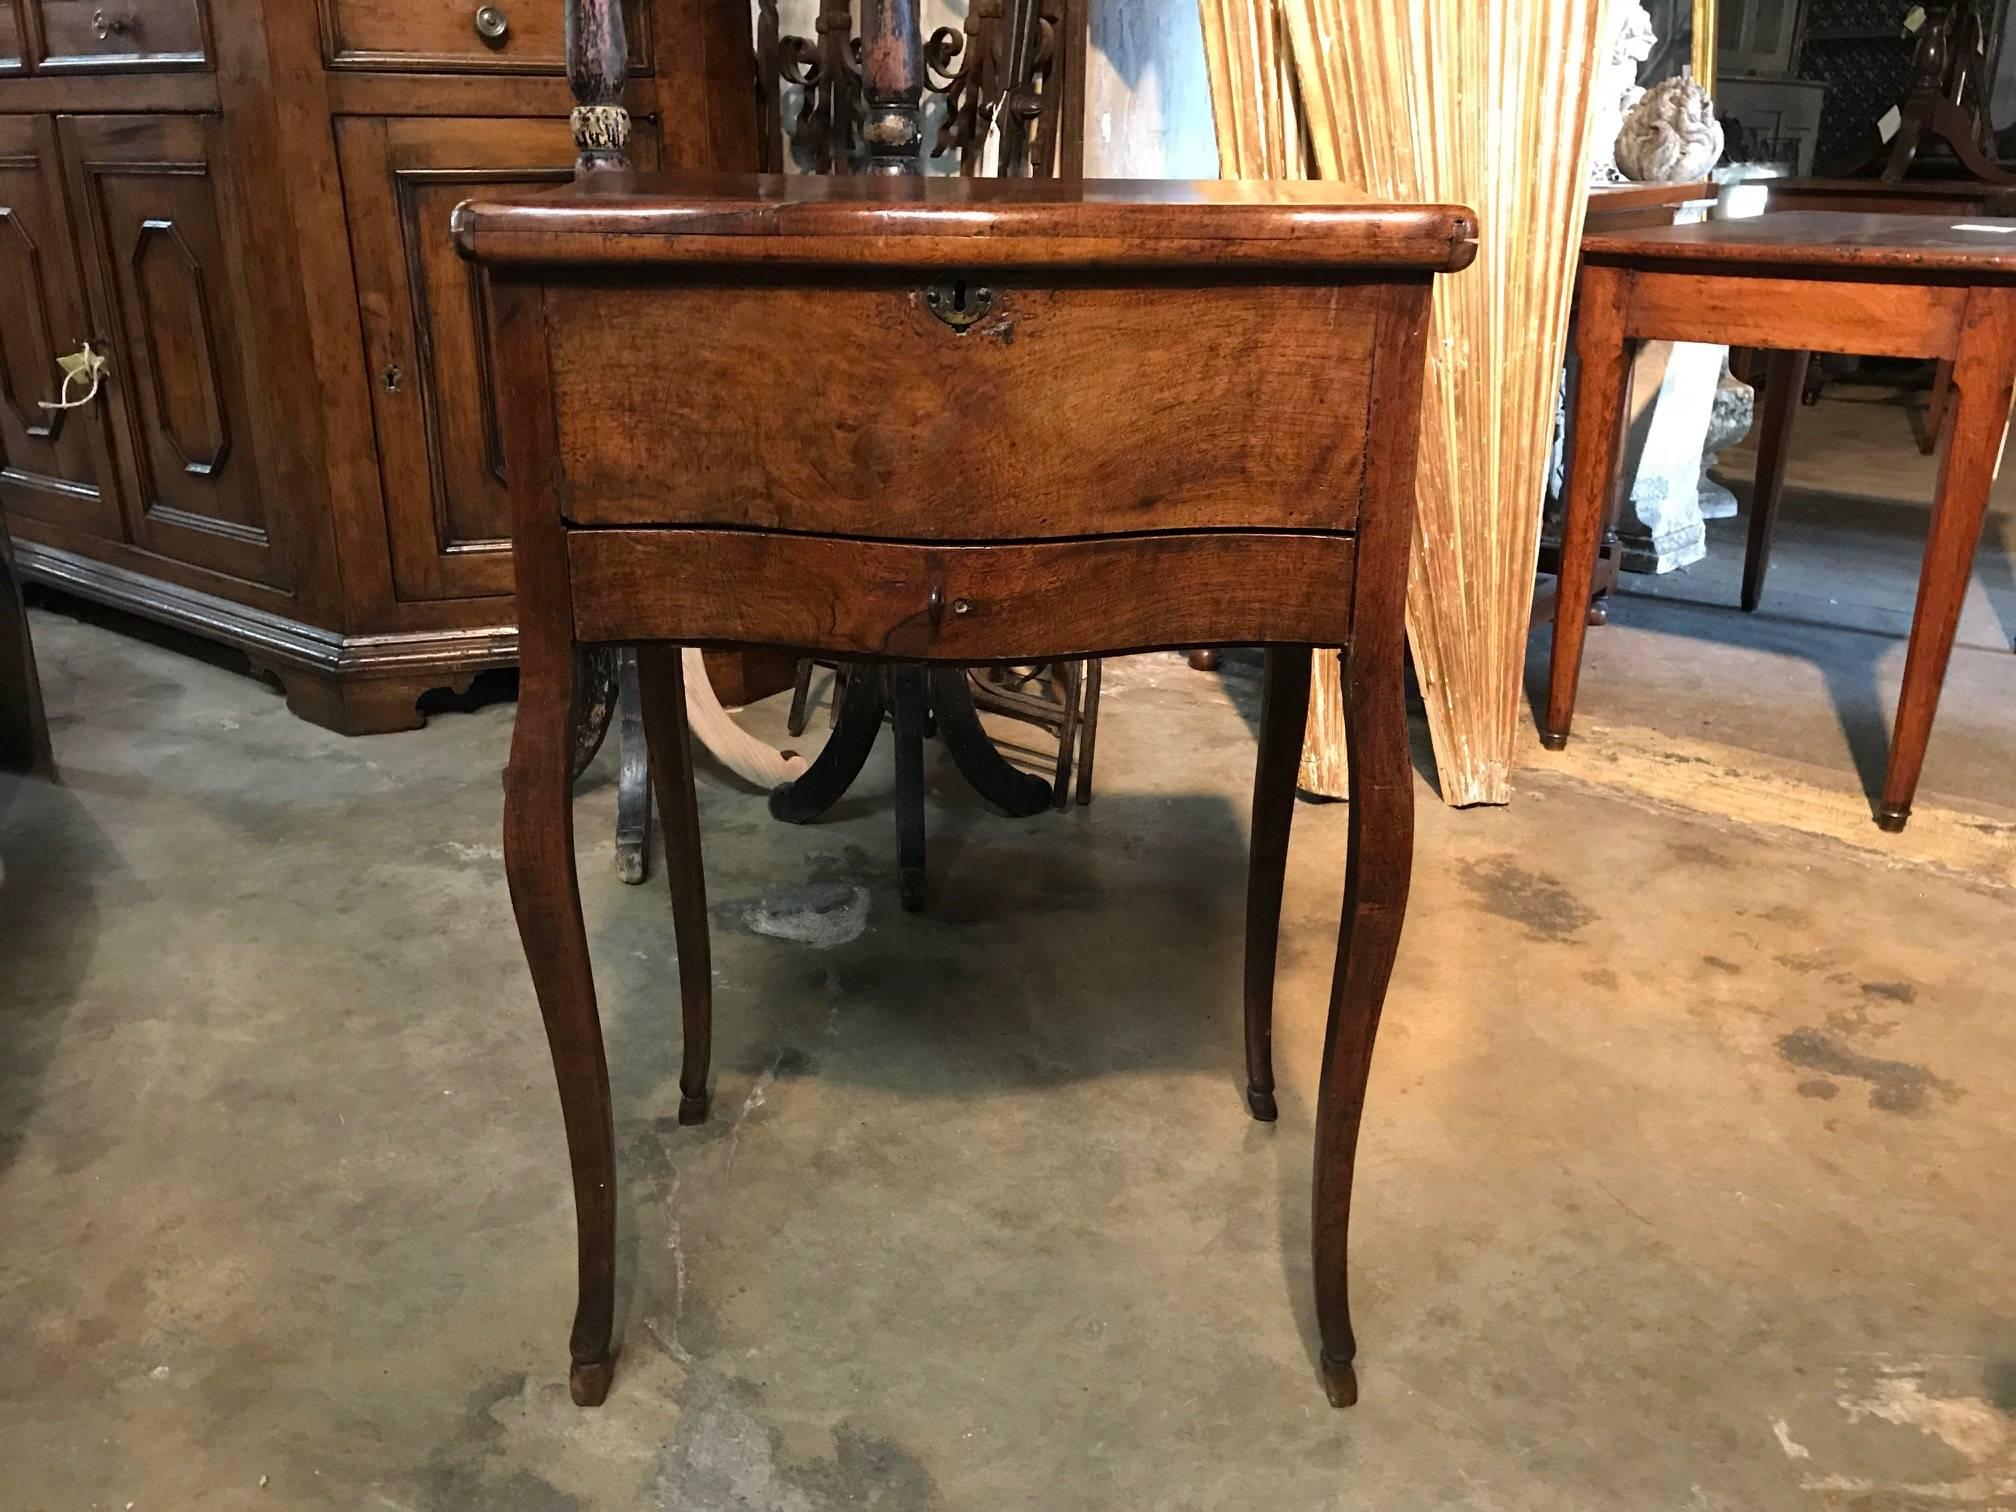 An outstanding early 19th century, French side table beautifully constructed from walnut. Tremendous patina, rich and luminous. The Perruquier table was used for storing wigs.